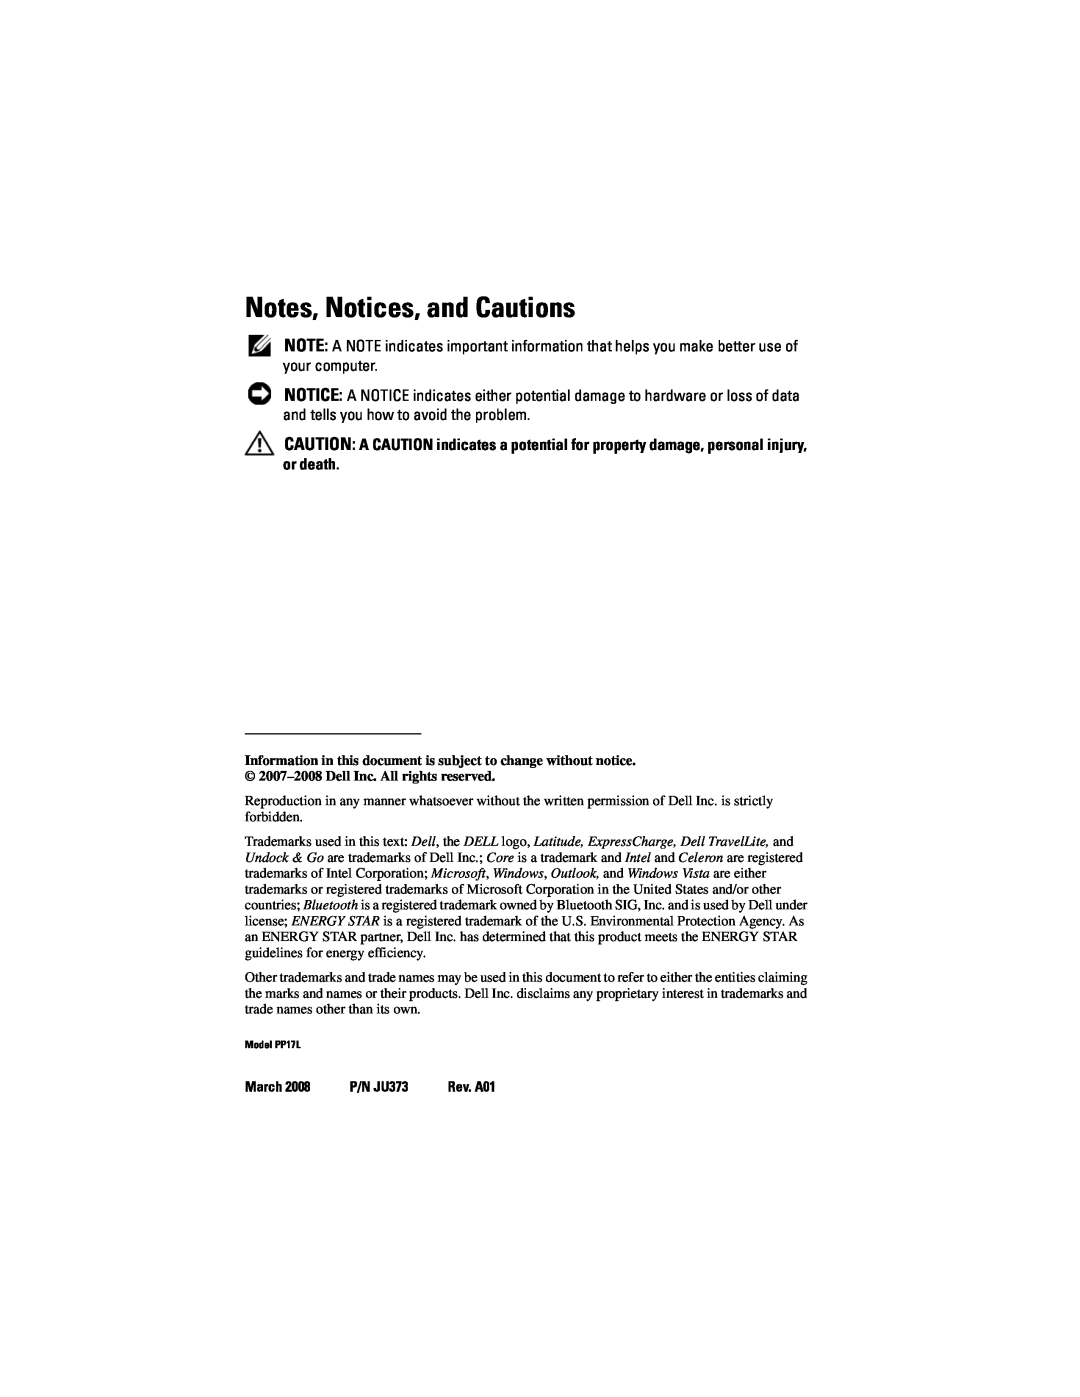 Dell D530 manual Notes, Notices, and Cautions, March, P/N JU373 